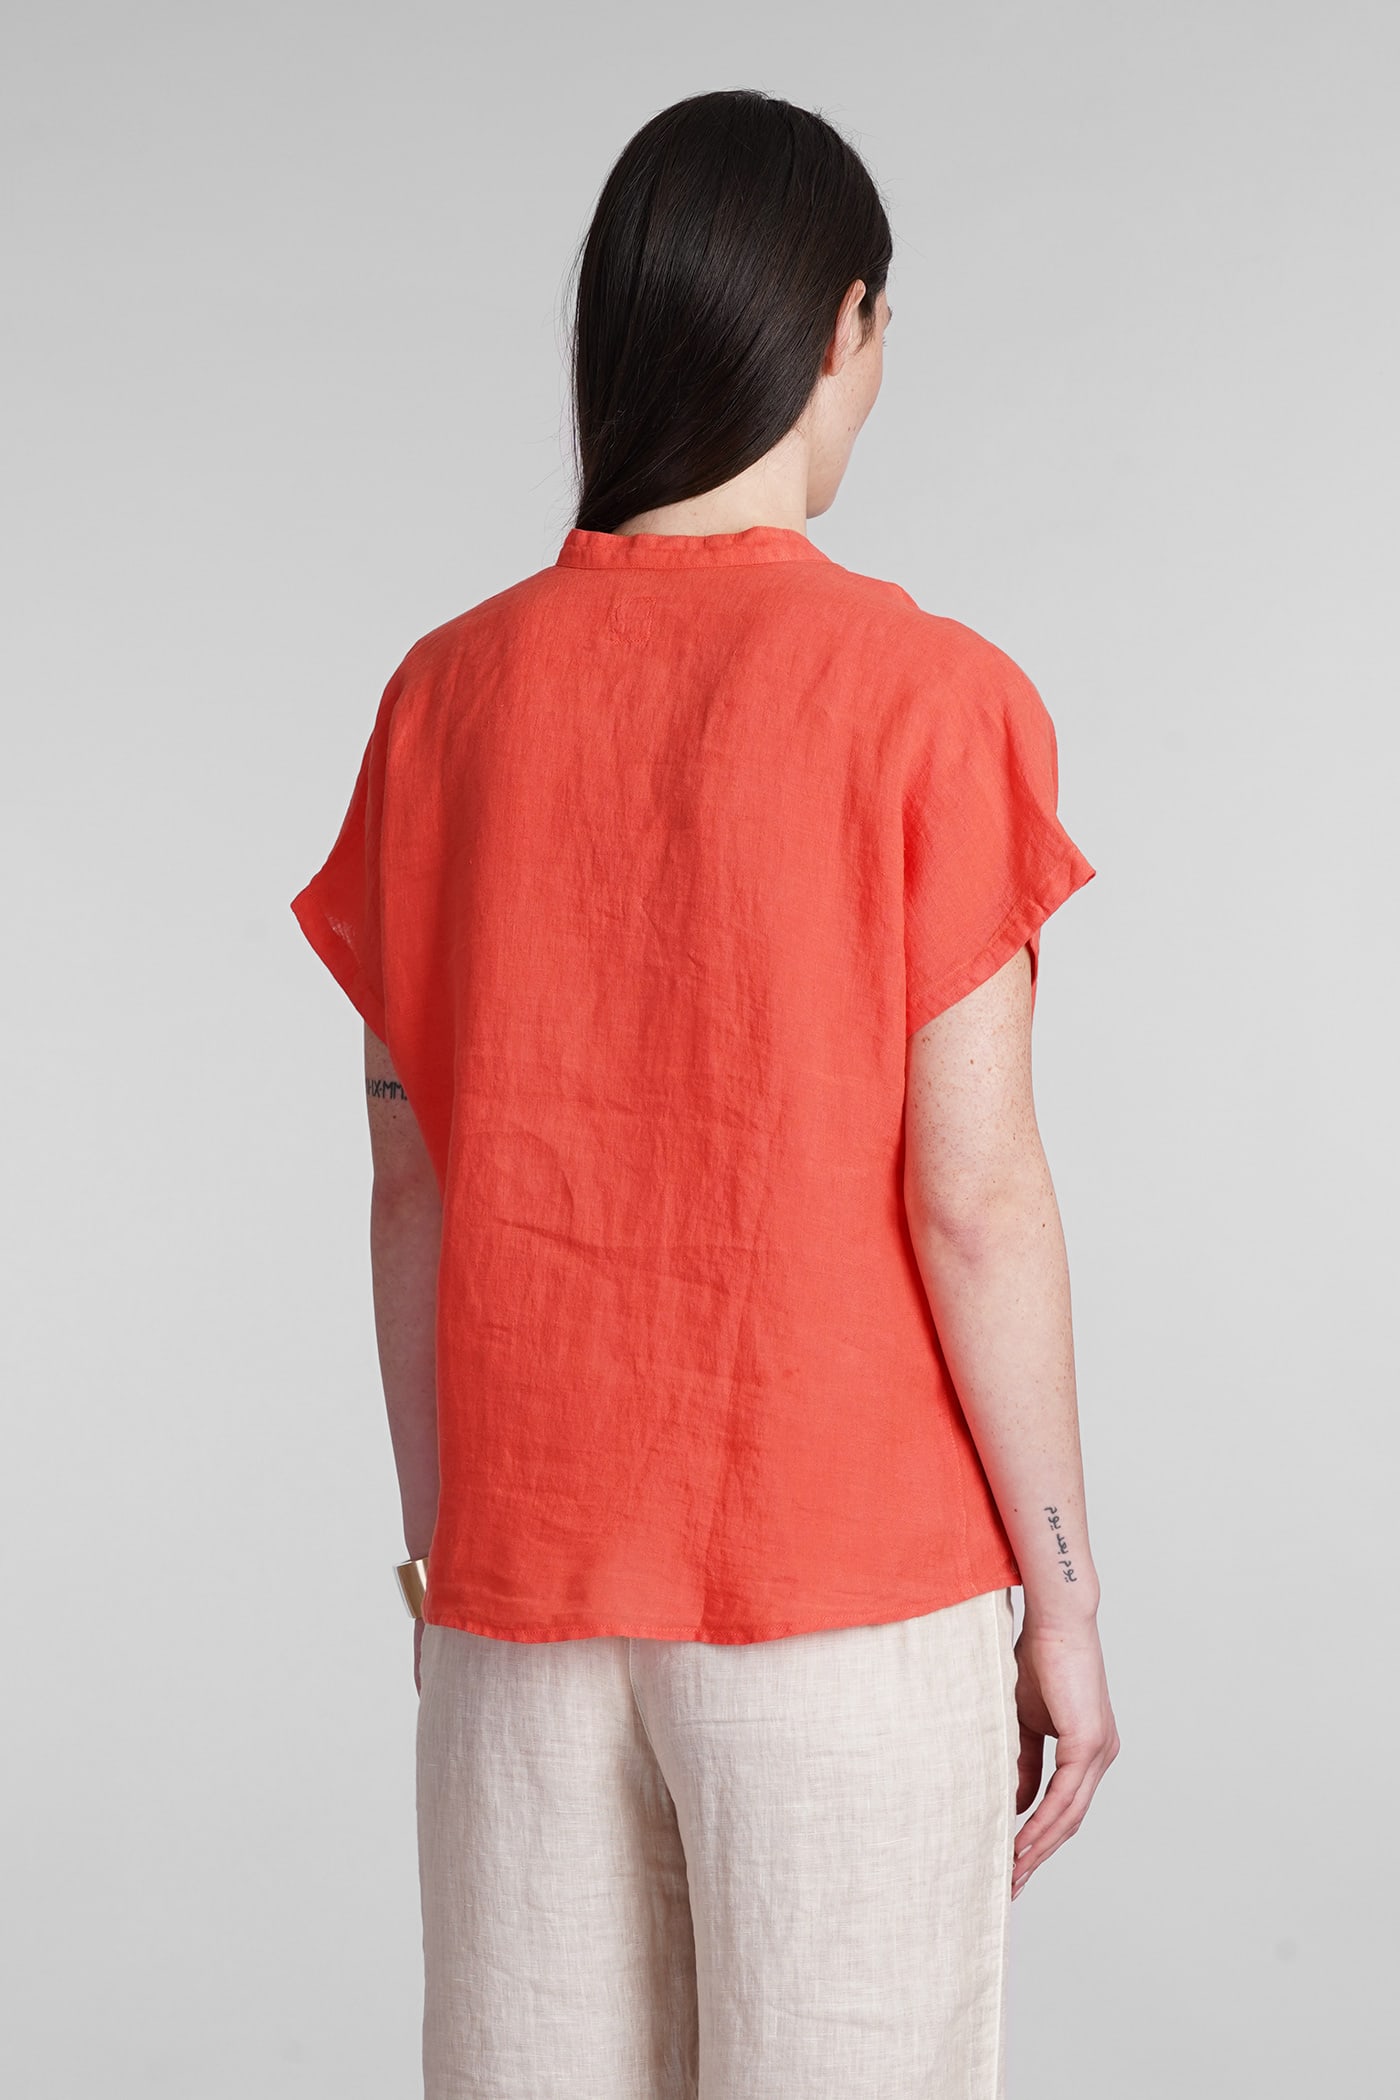 Shop 120% Lino Blouse In Red Linen